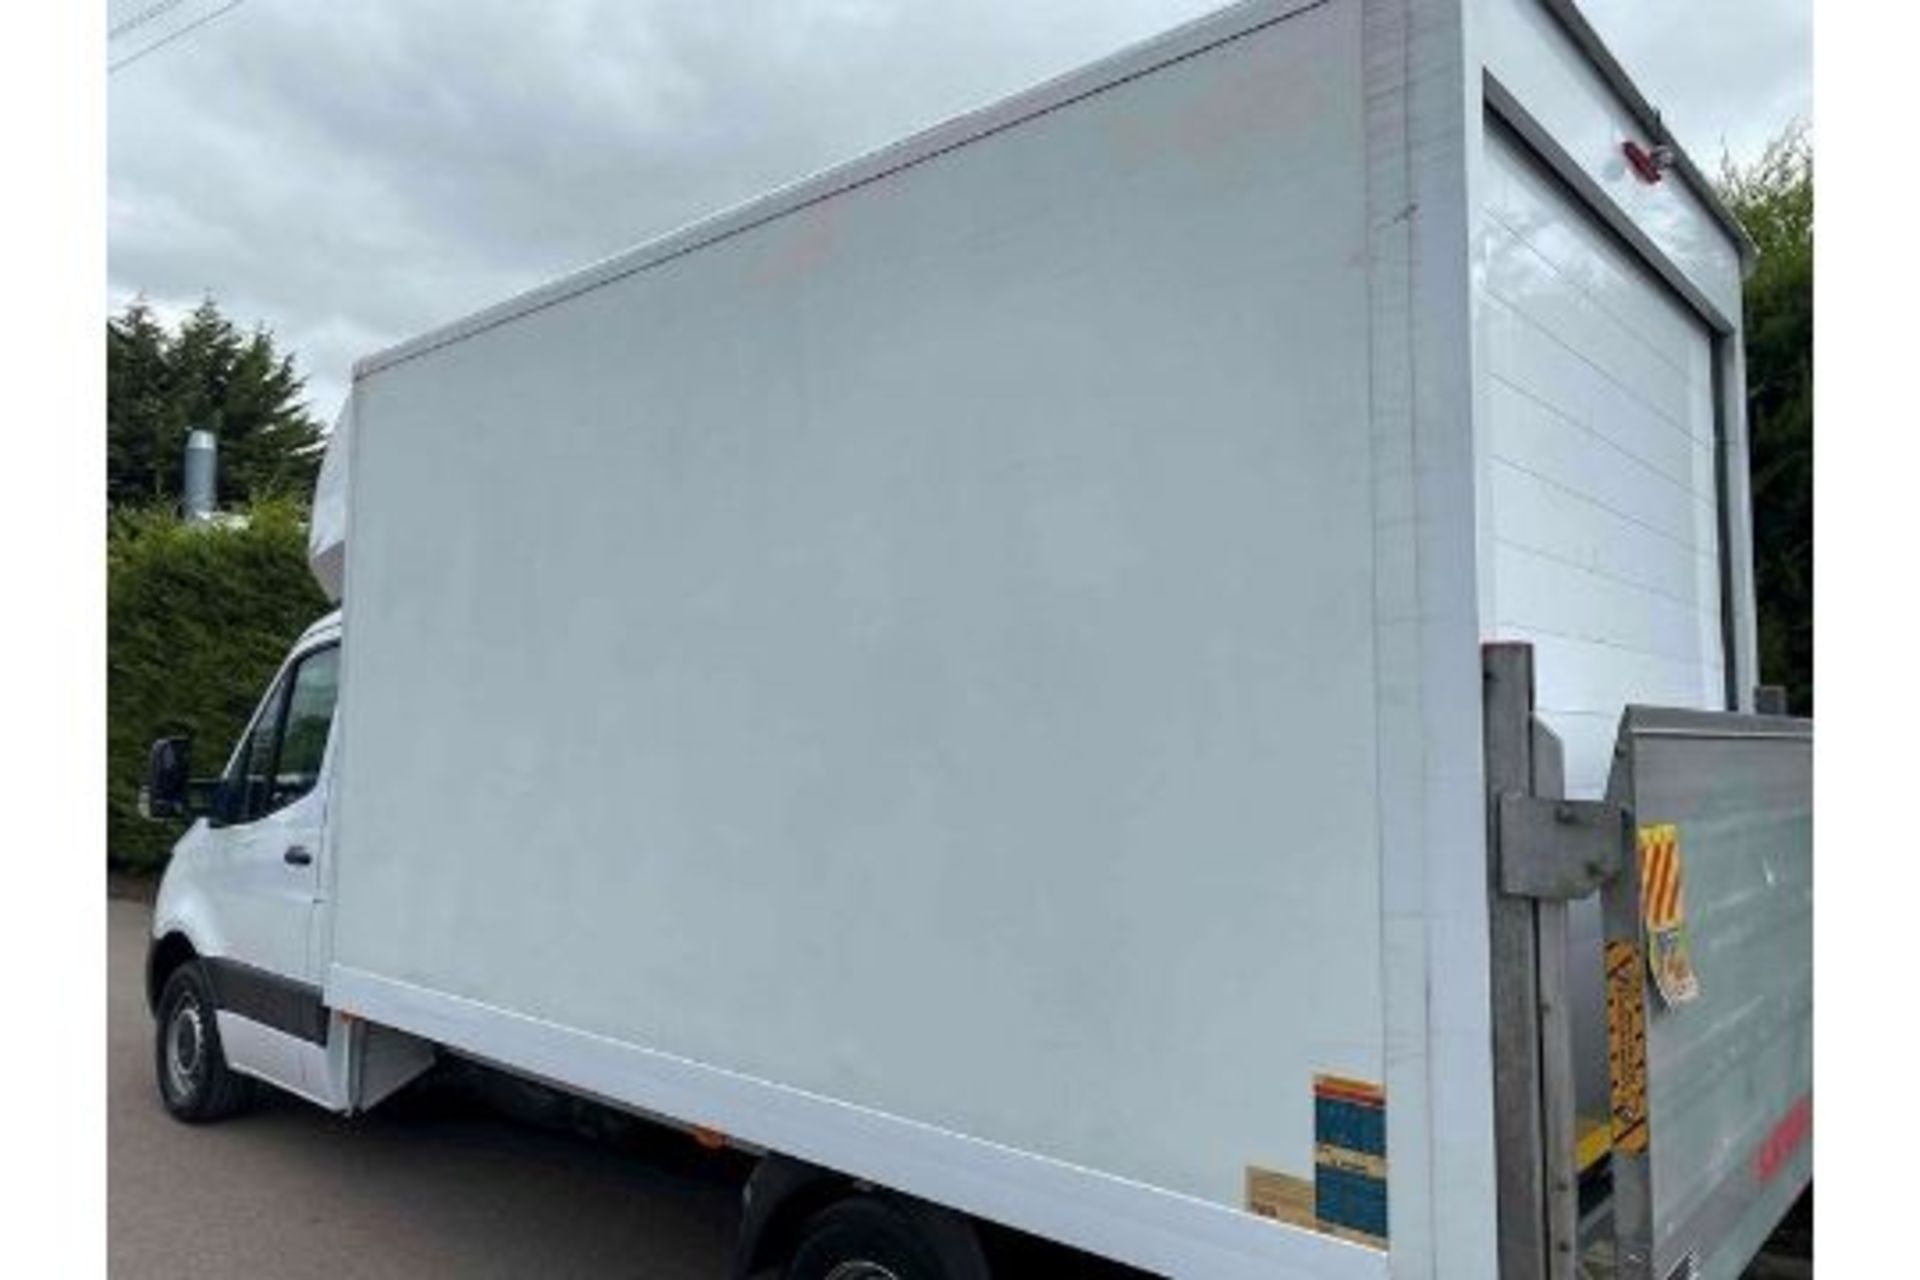 Mercedes Sprinter 314Cdi LWB Luton Body with TL - 2020 20 Reg 1 Owner - New Shape - Image 2 of 8